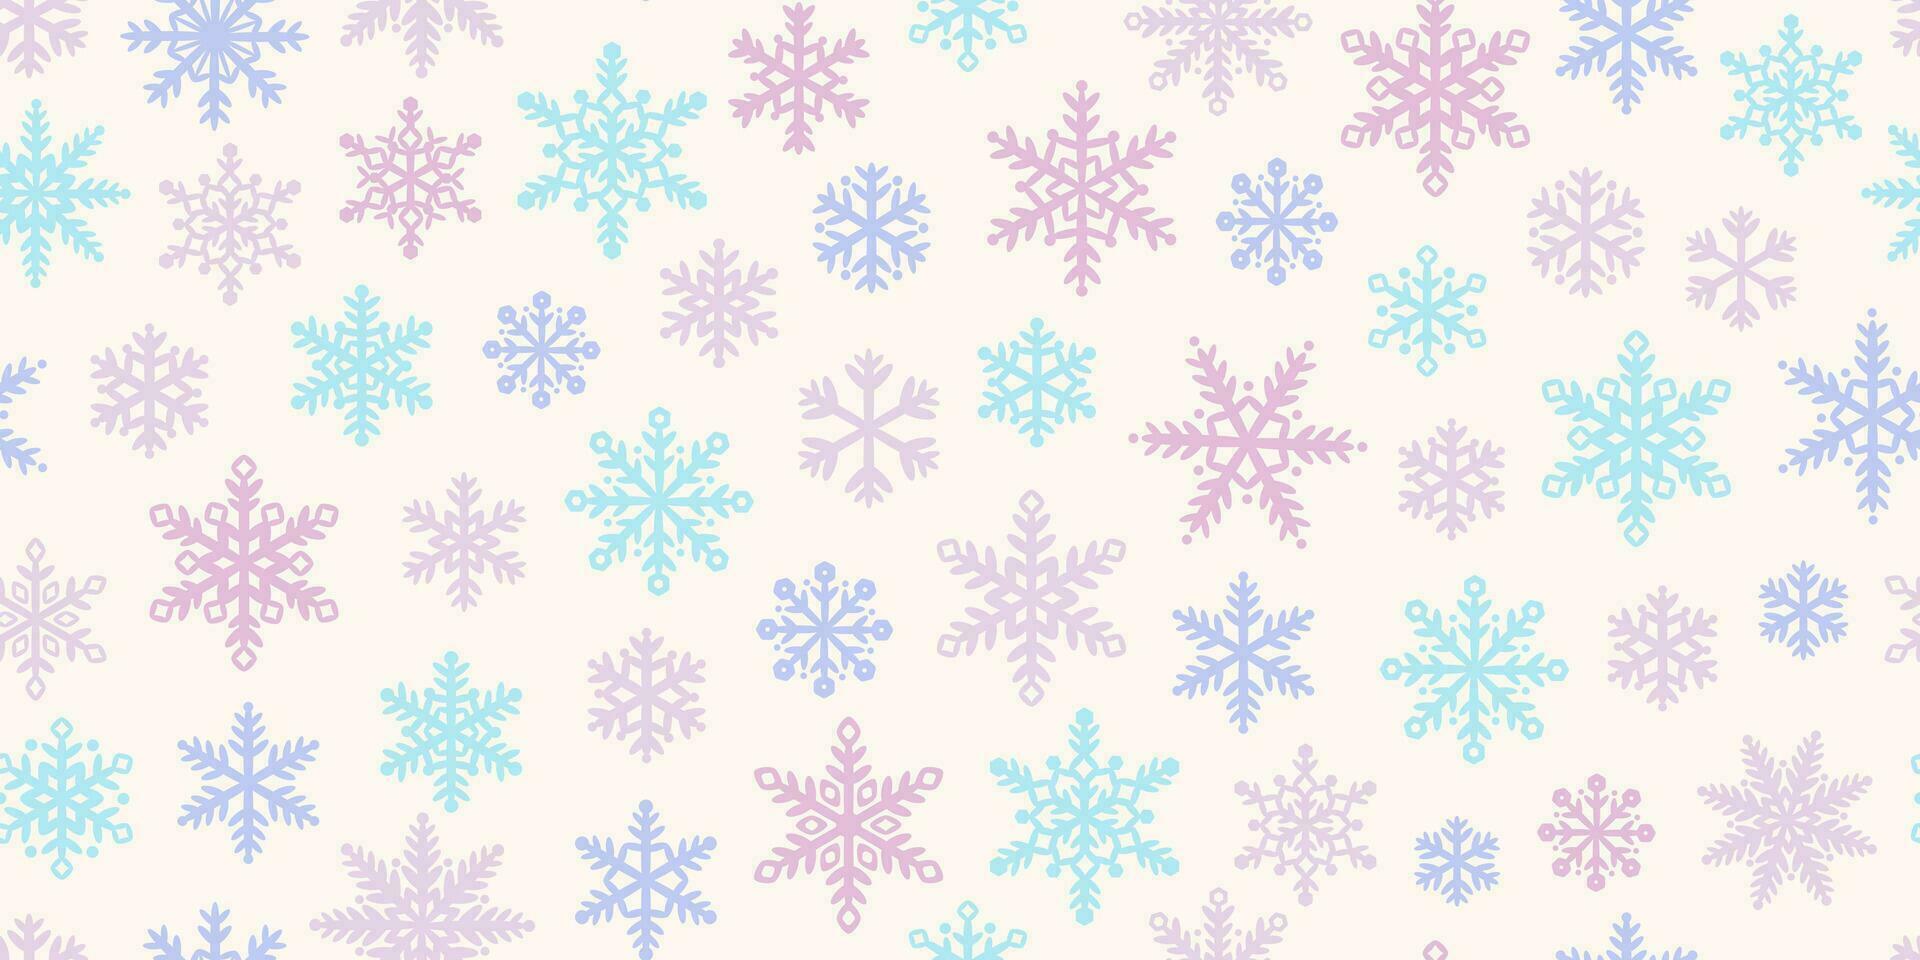 Cute pastel snowflake Christmas vector repeat pattern background, seamless holiday wallpaper or textile design